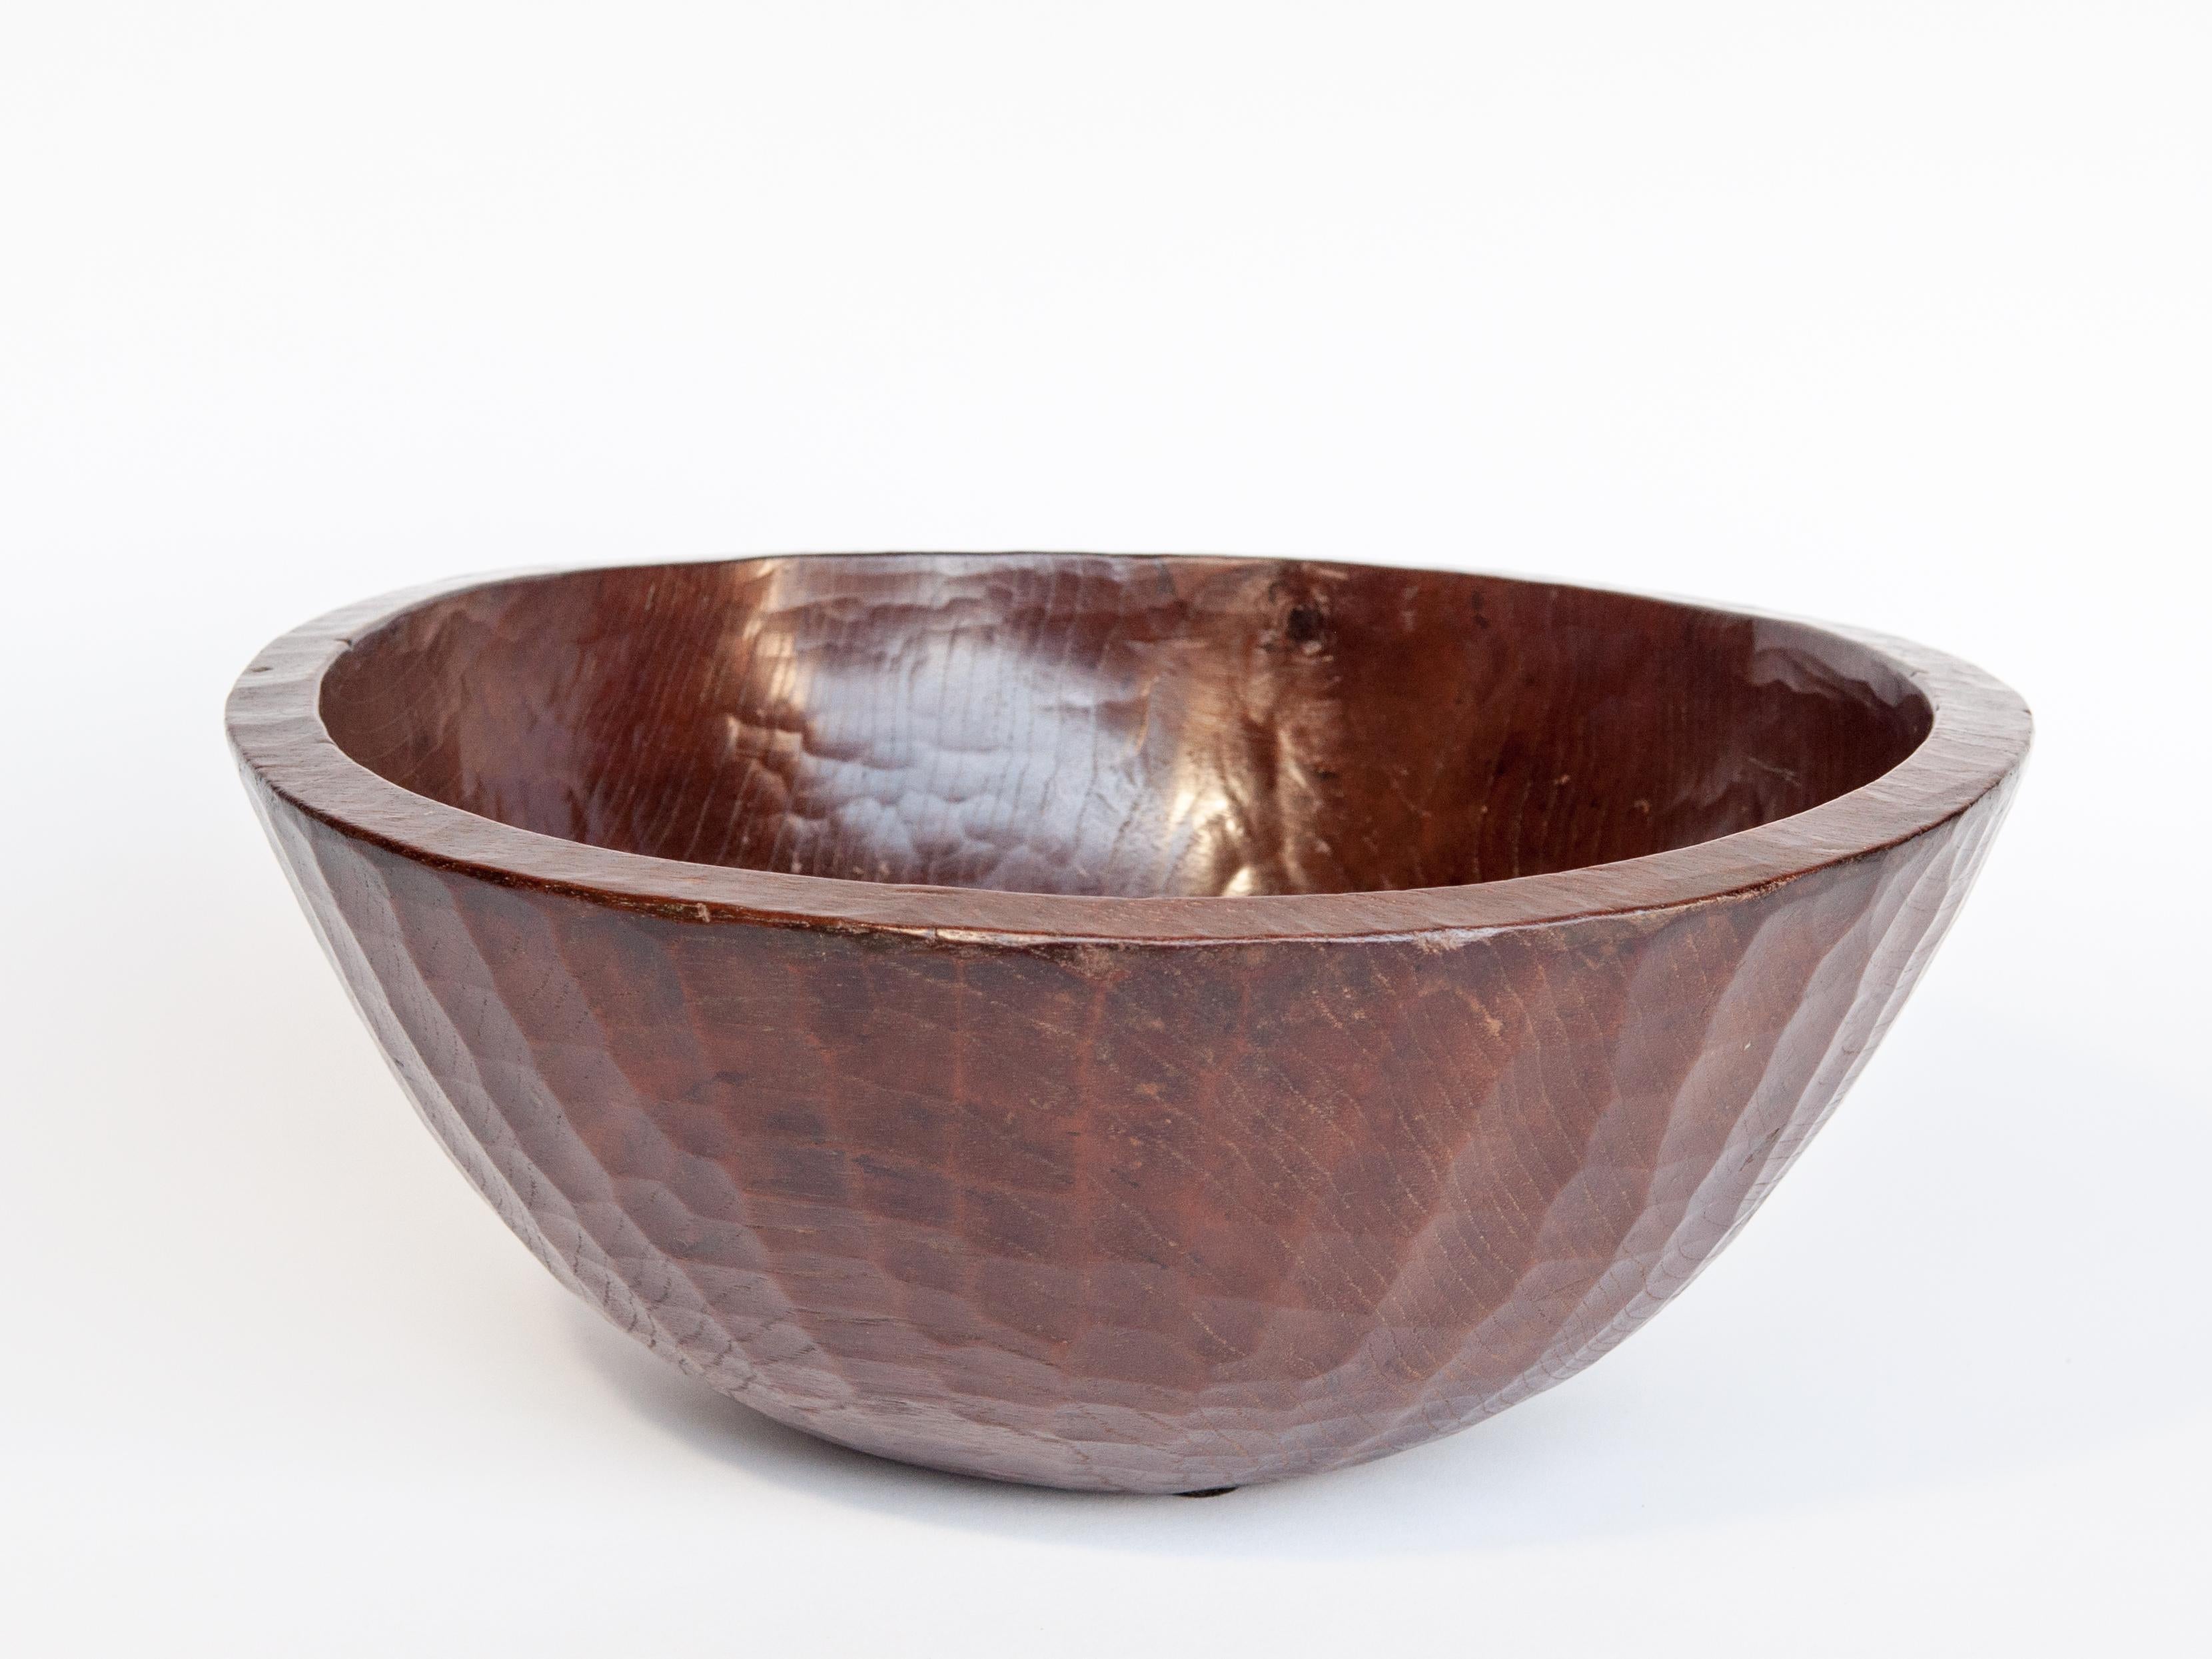 Organic Modern Old Tribal Wooden Bowl from the West Nepal Himal, Mid-20th Century